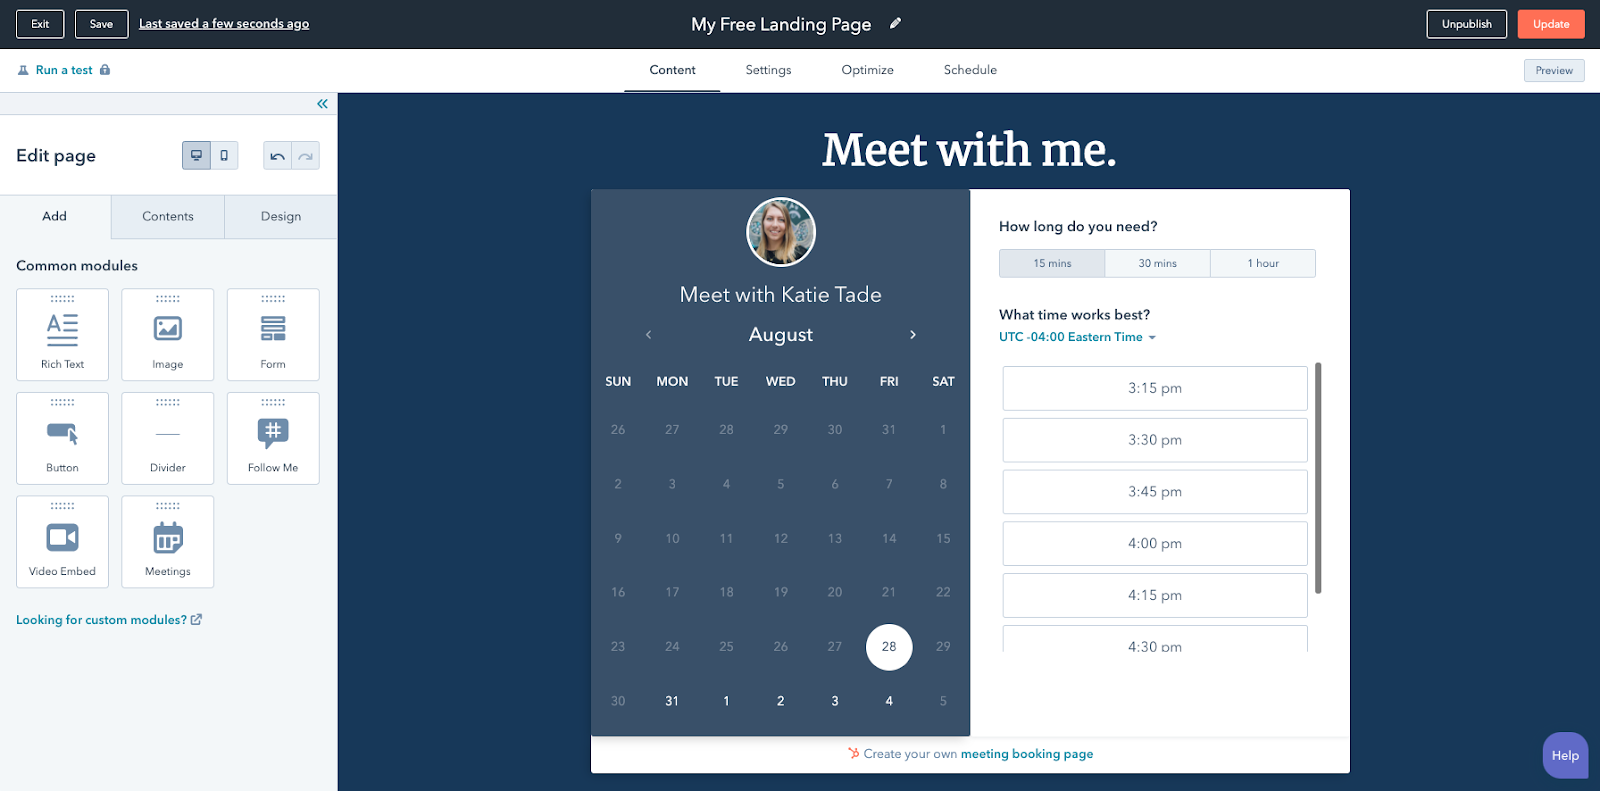 The 7 Best Leadpages Alternatives in 2020